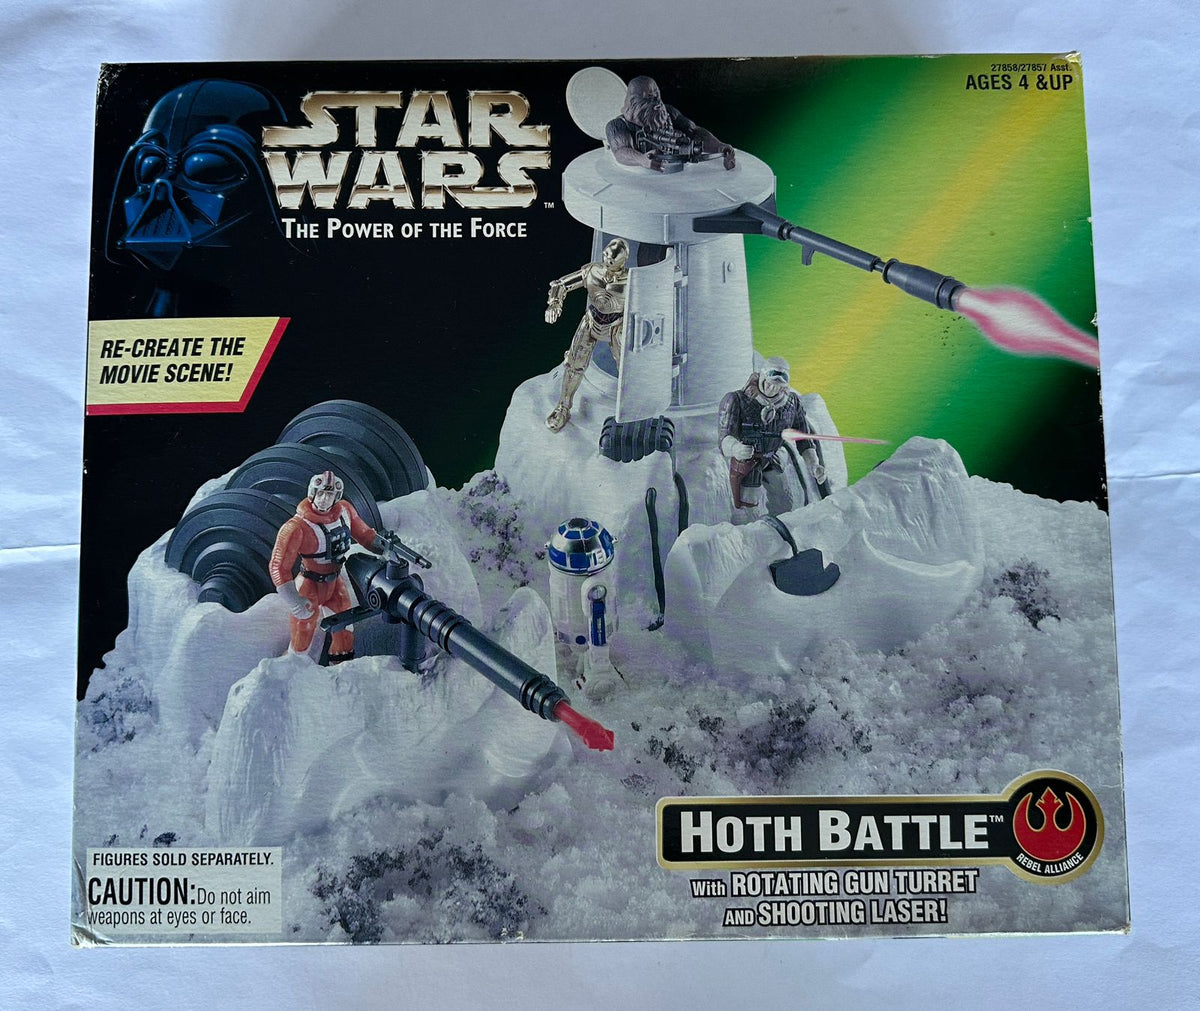 Hoth Battle with Rotating Gun Turret